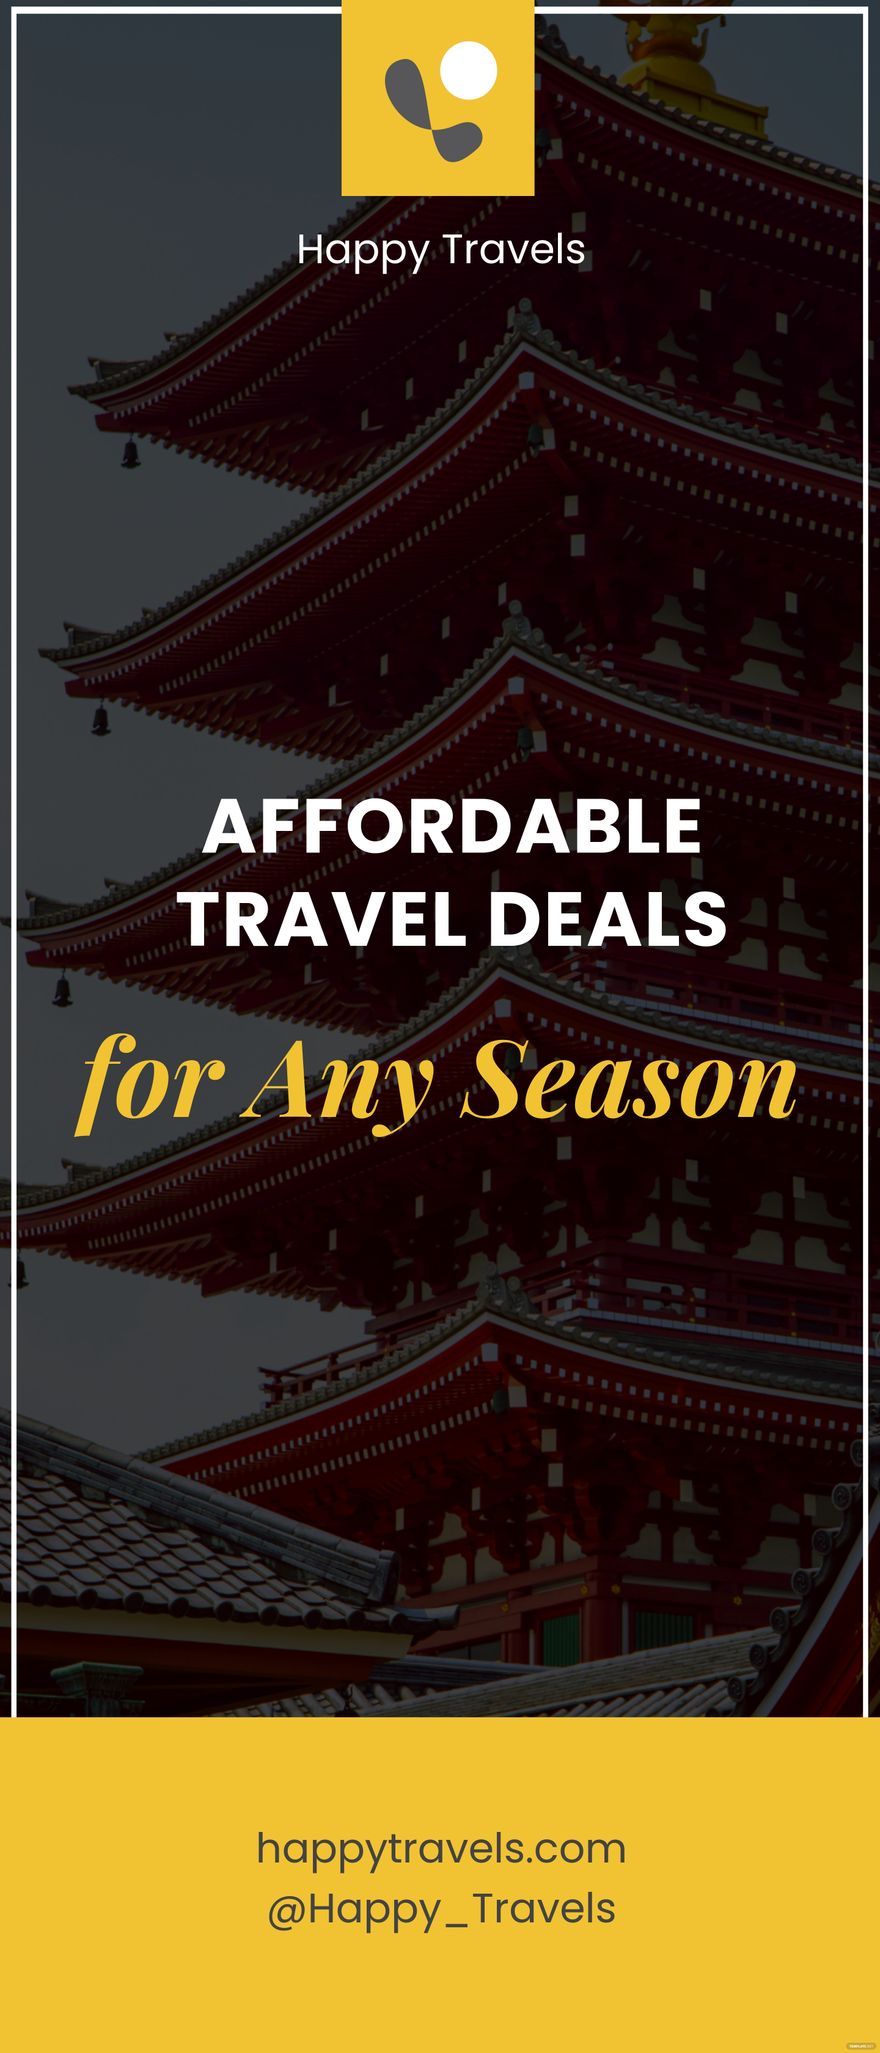 Free Simple Travel Roll Up Banner Template